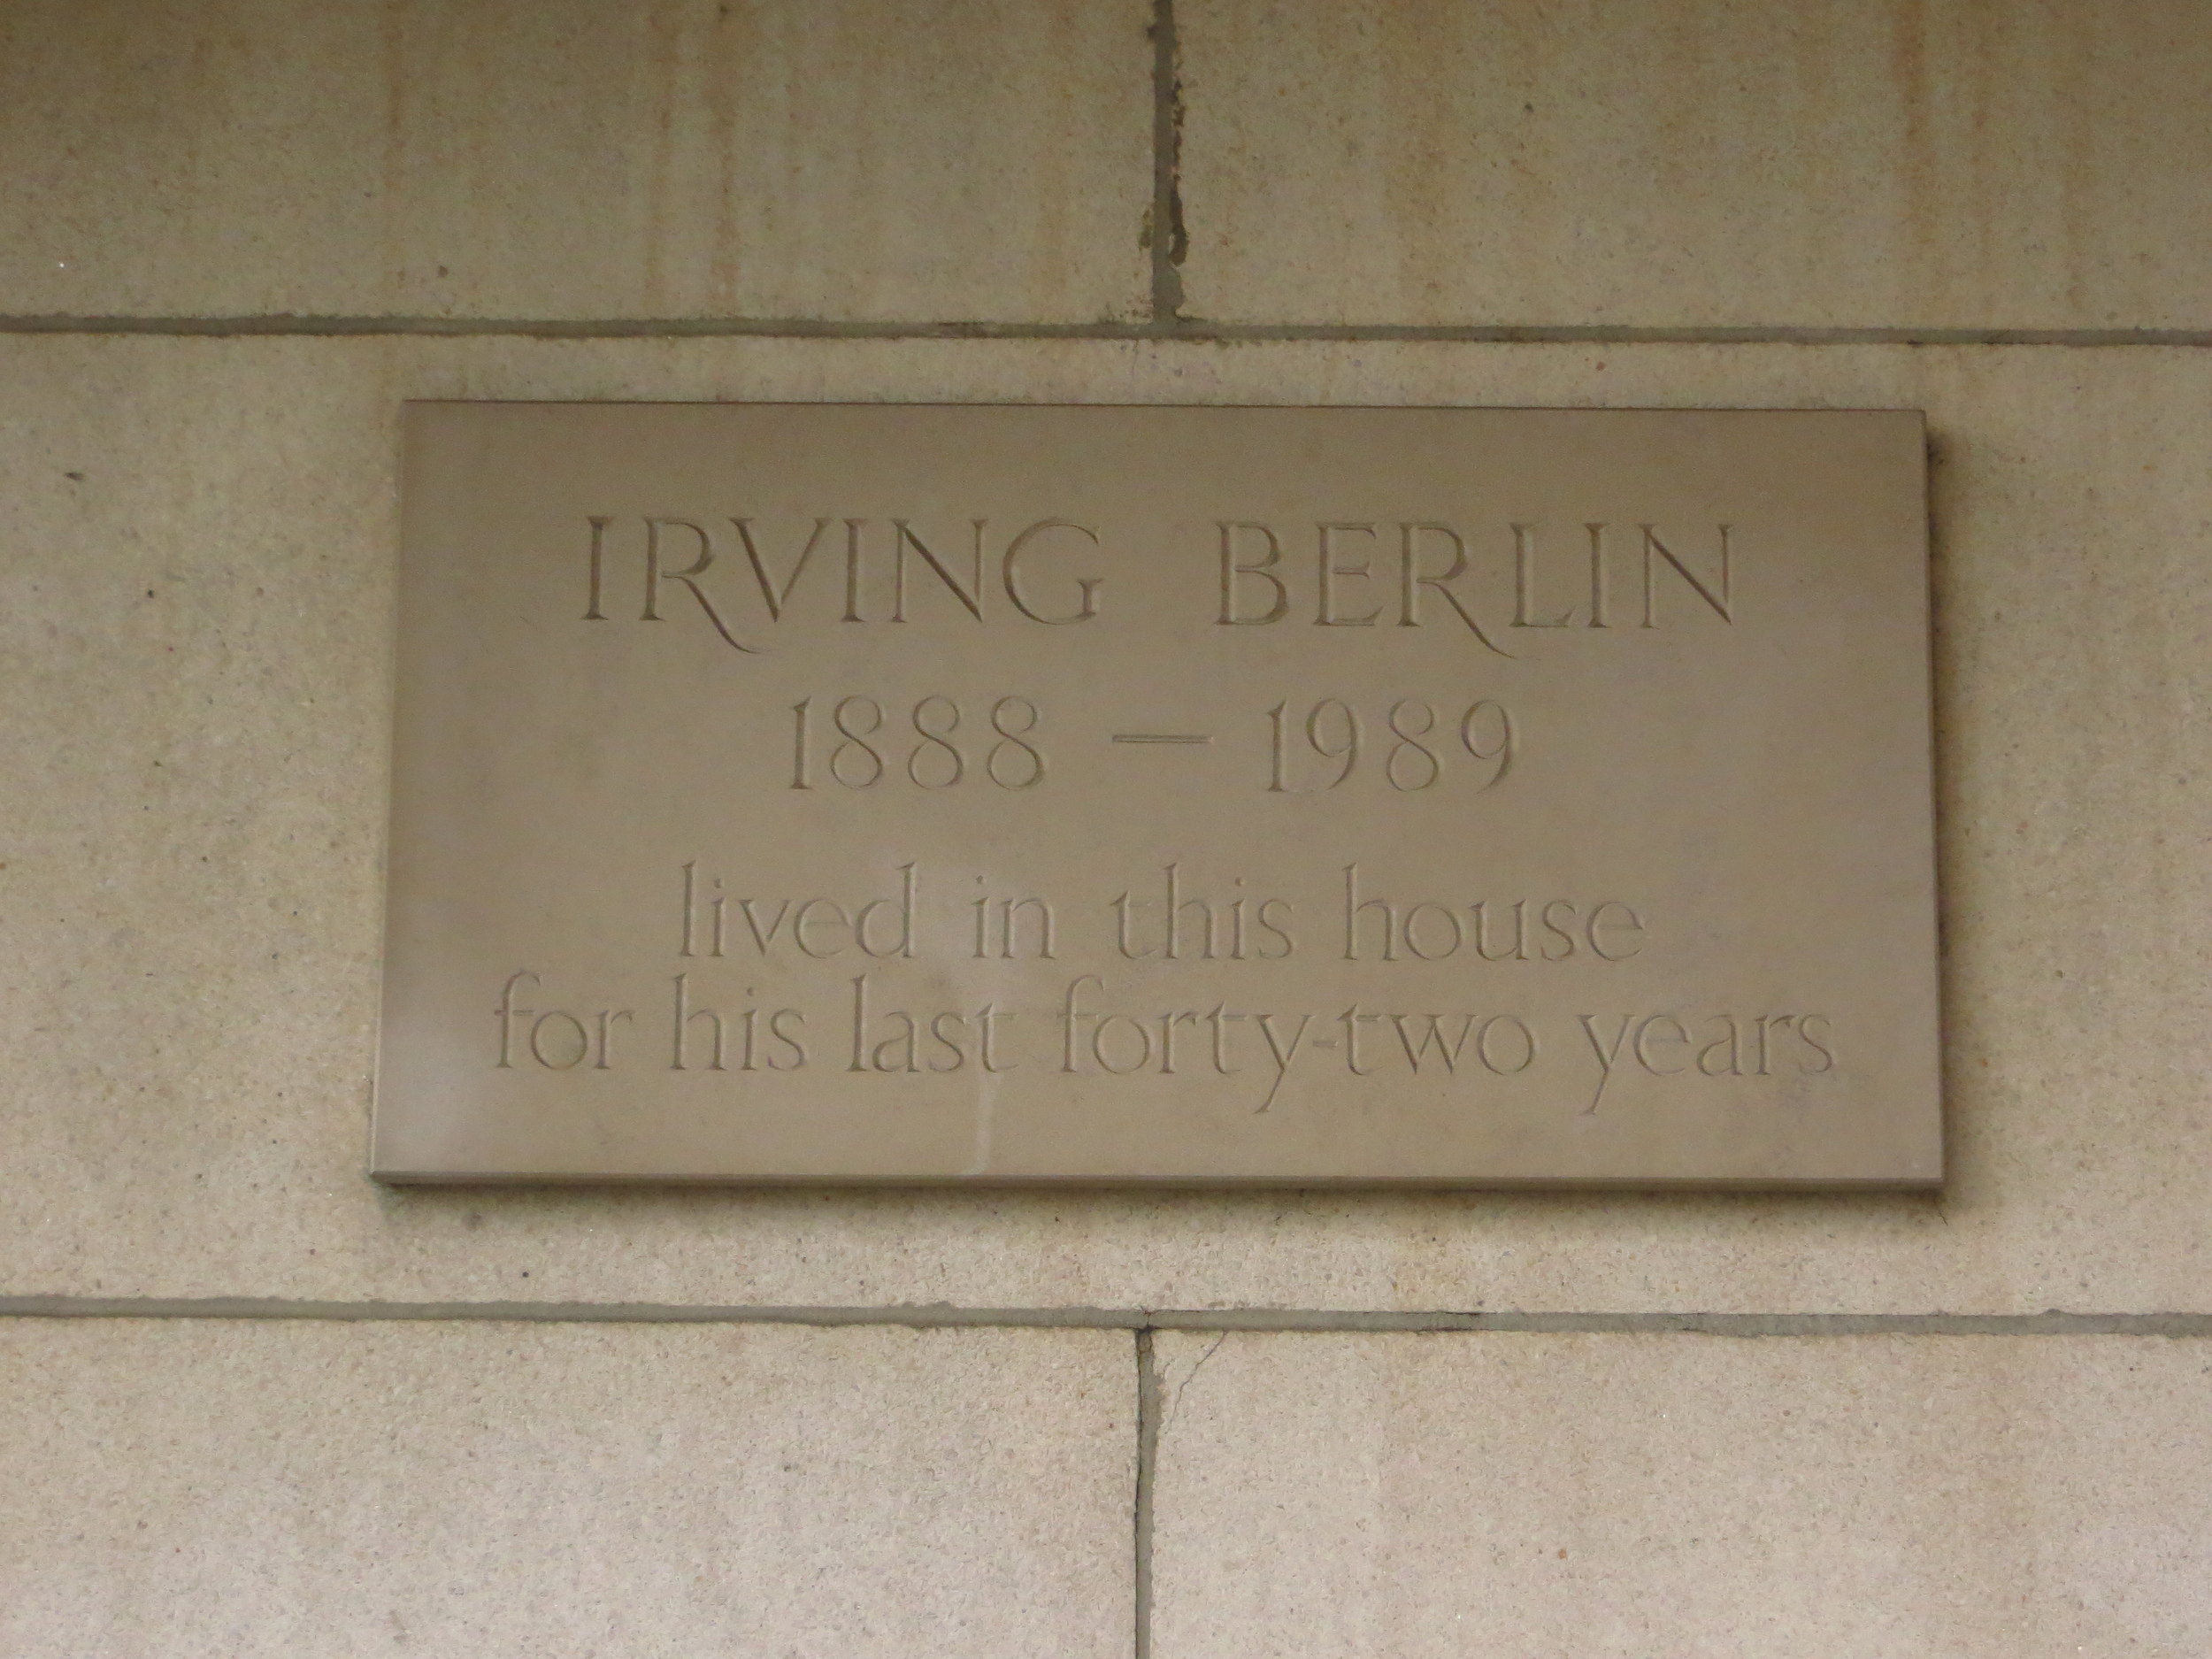 It was the home of Irving Berlin (who wrote "White Christmas")